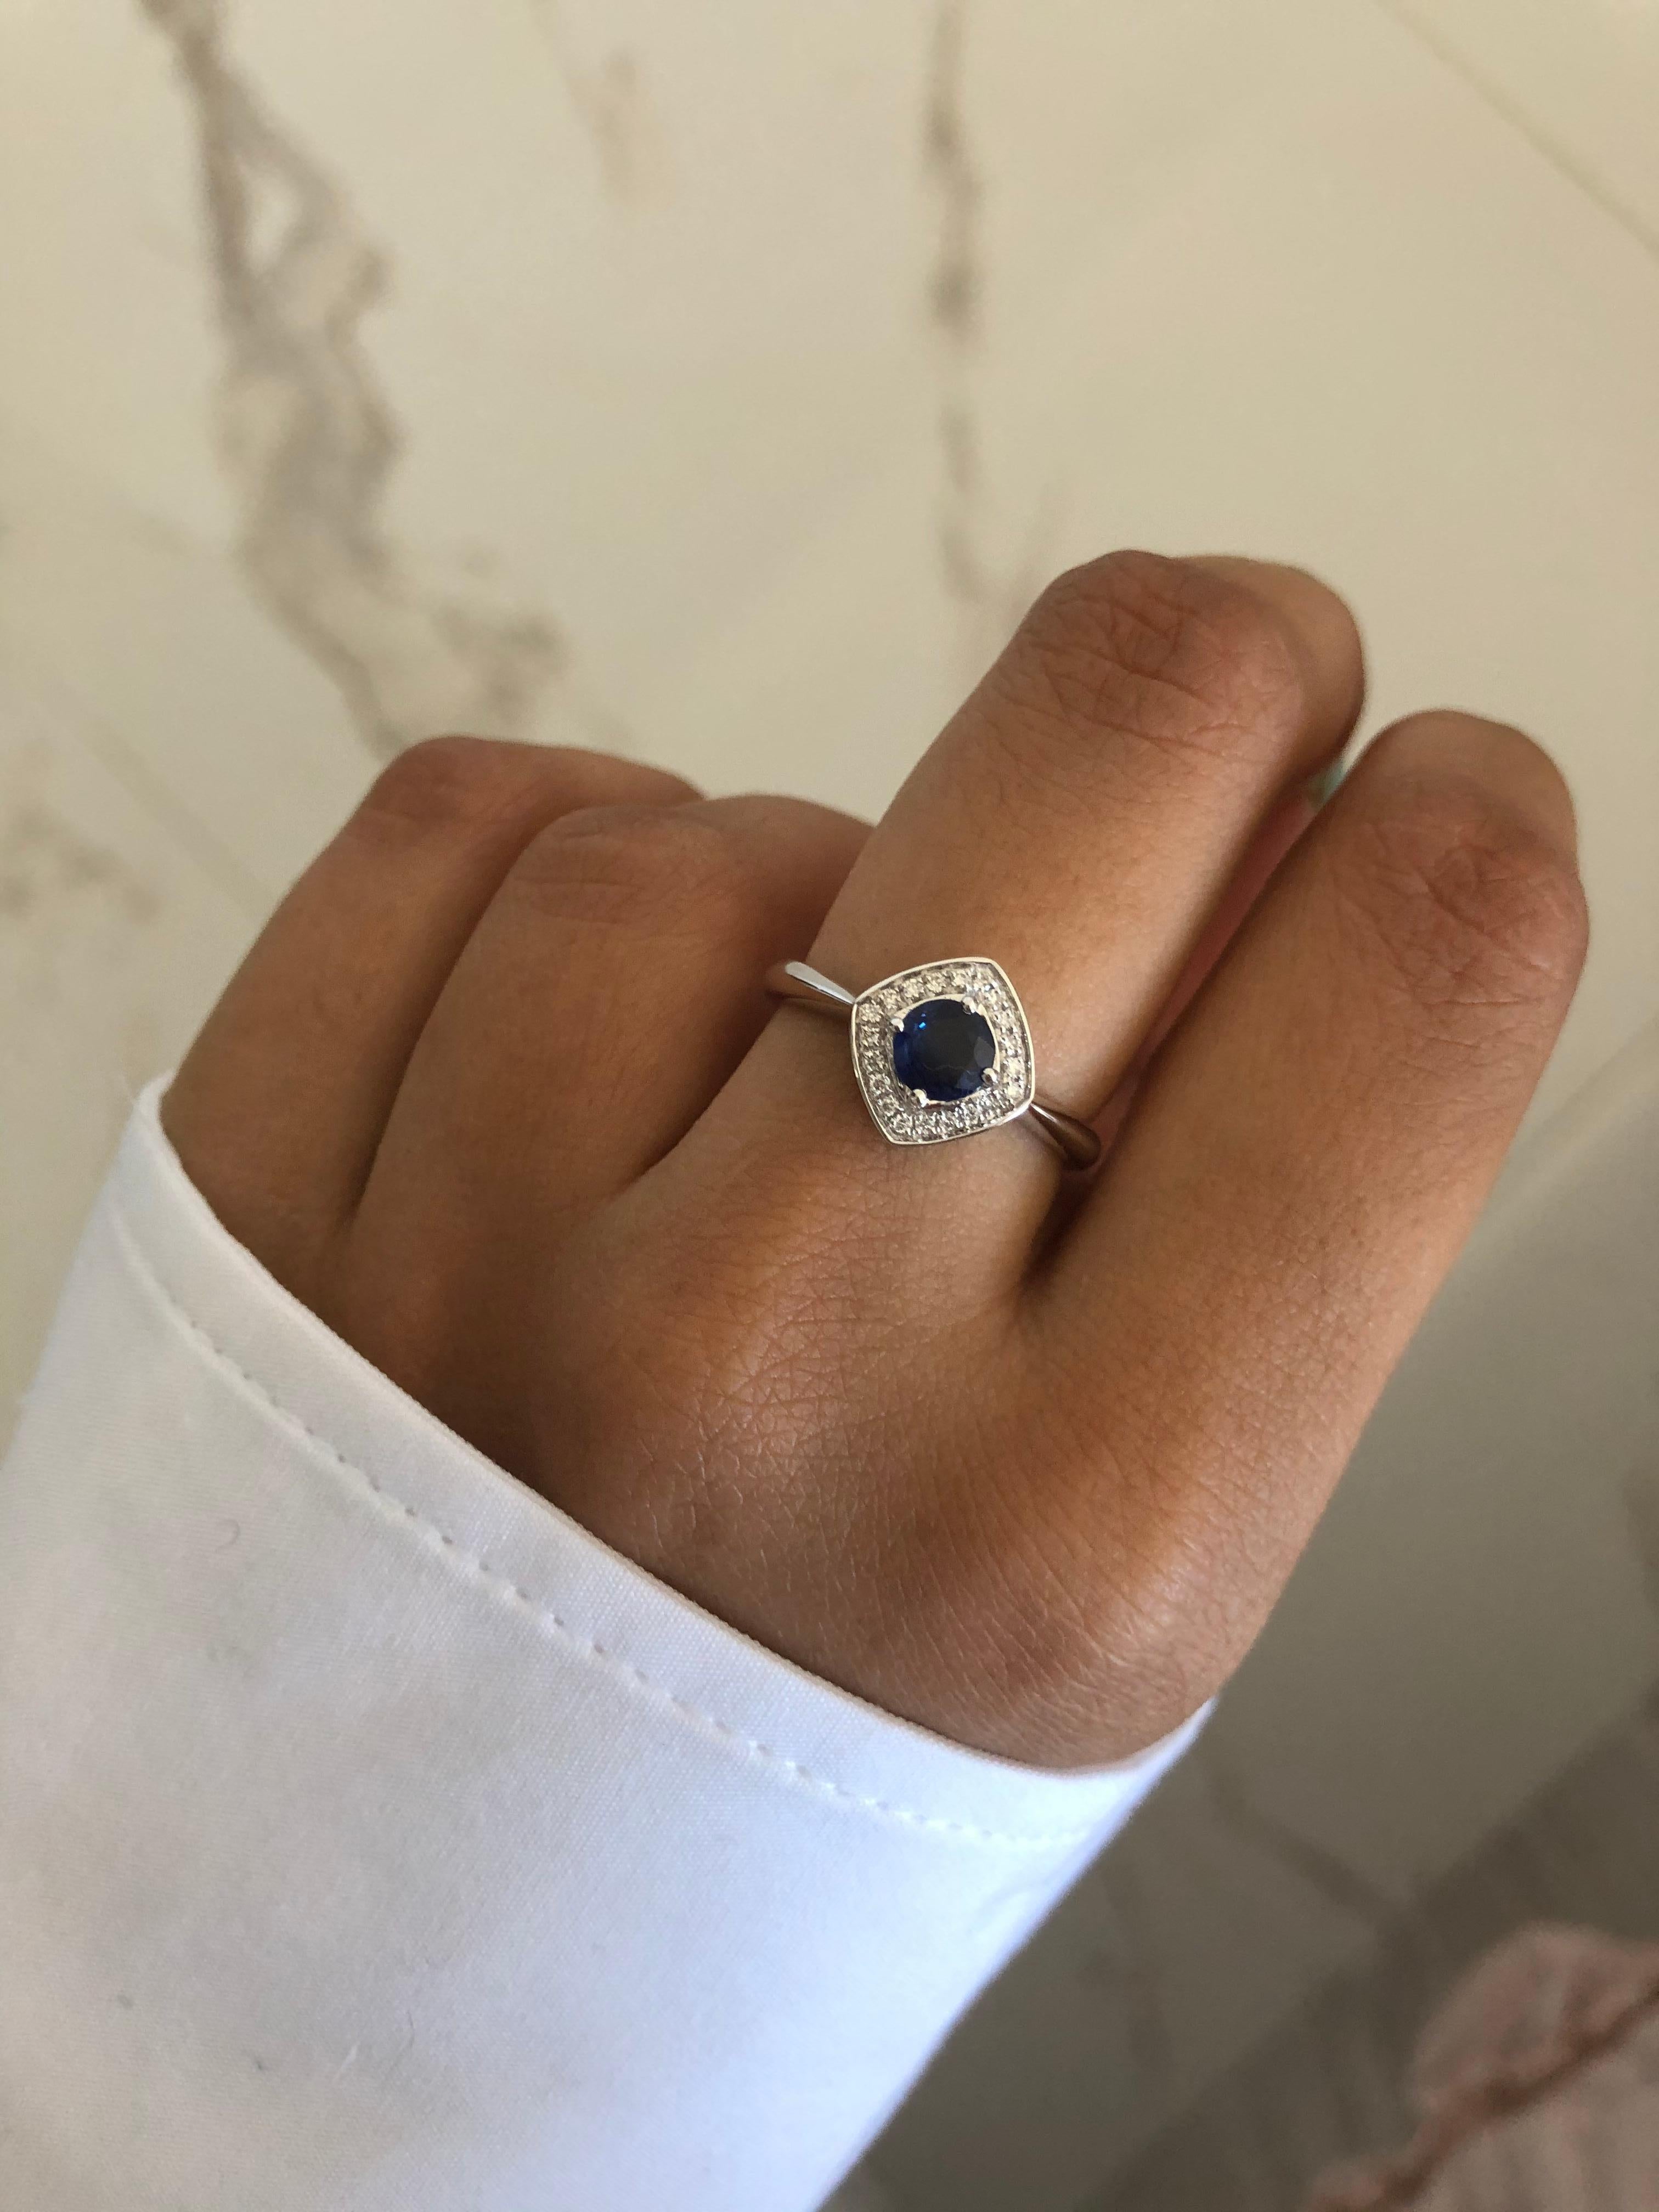 Work From Home Essentials! This collection features a dainty selection of jewelry with blue sapphires and diamonds. These Blue Sapphires are sourced from Madagascar and project a bold blue hue. Accented with diamonds, these minimal pieces can be the